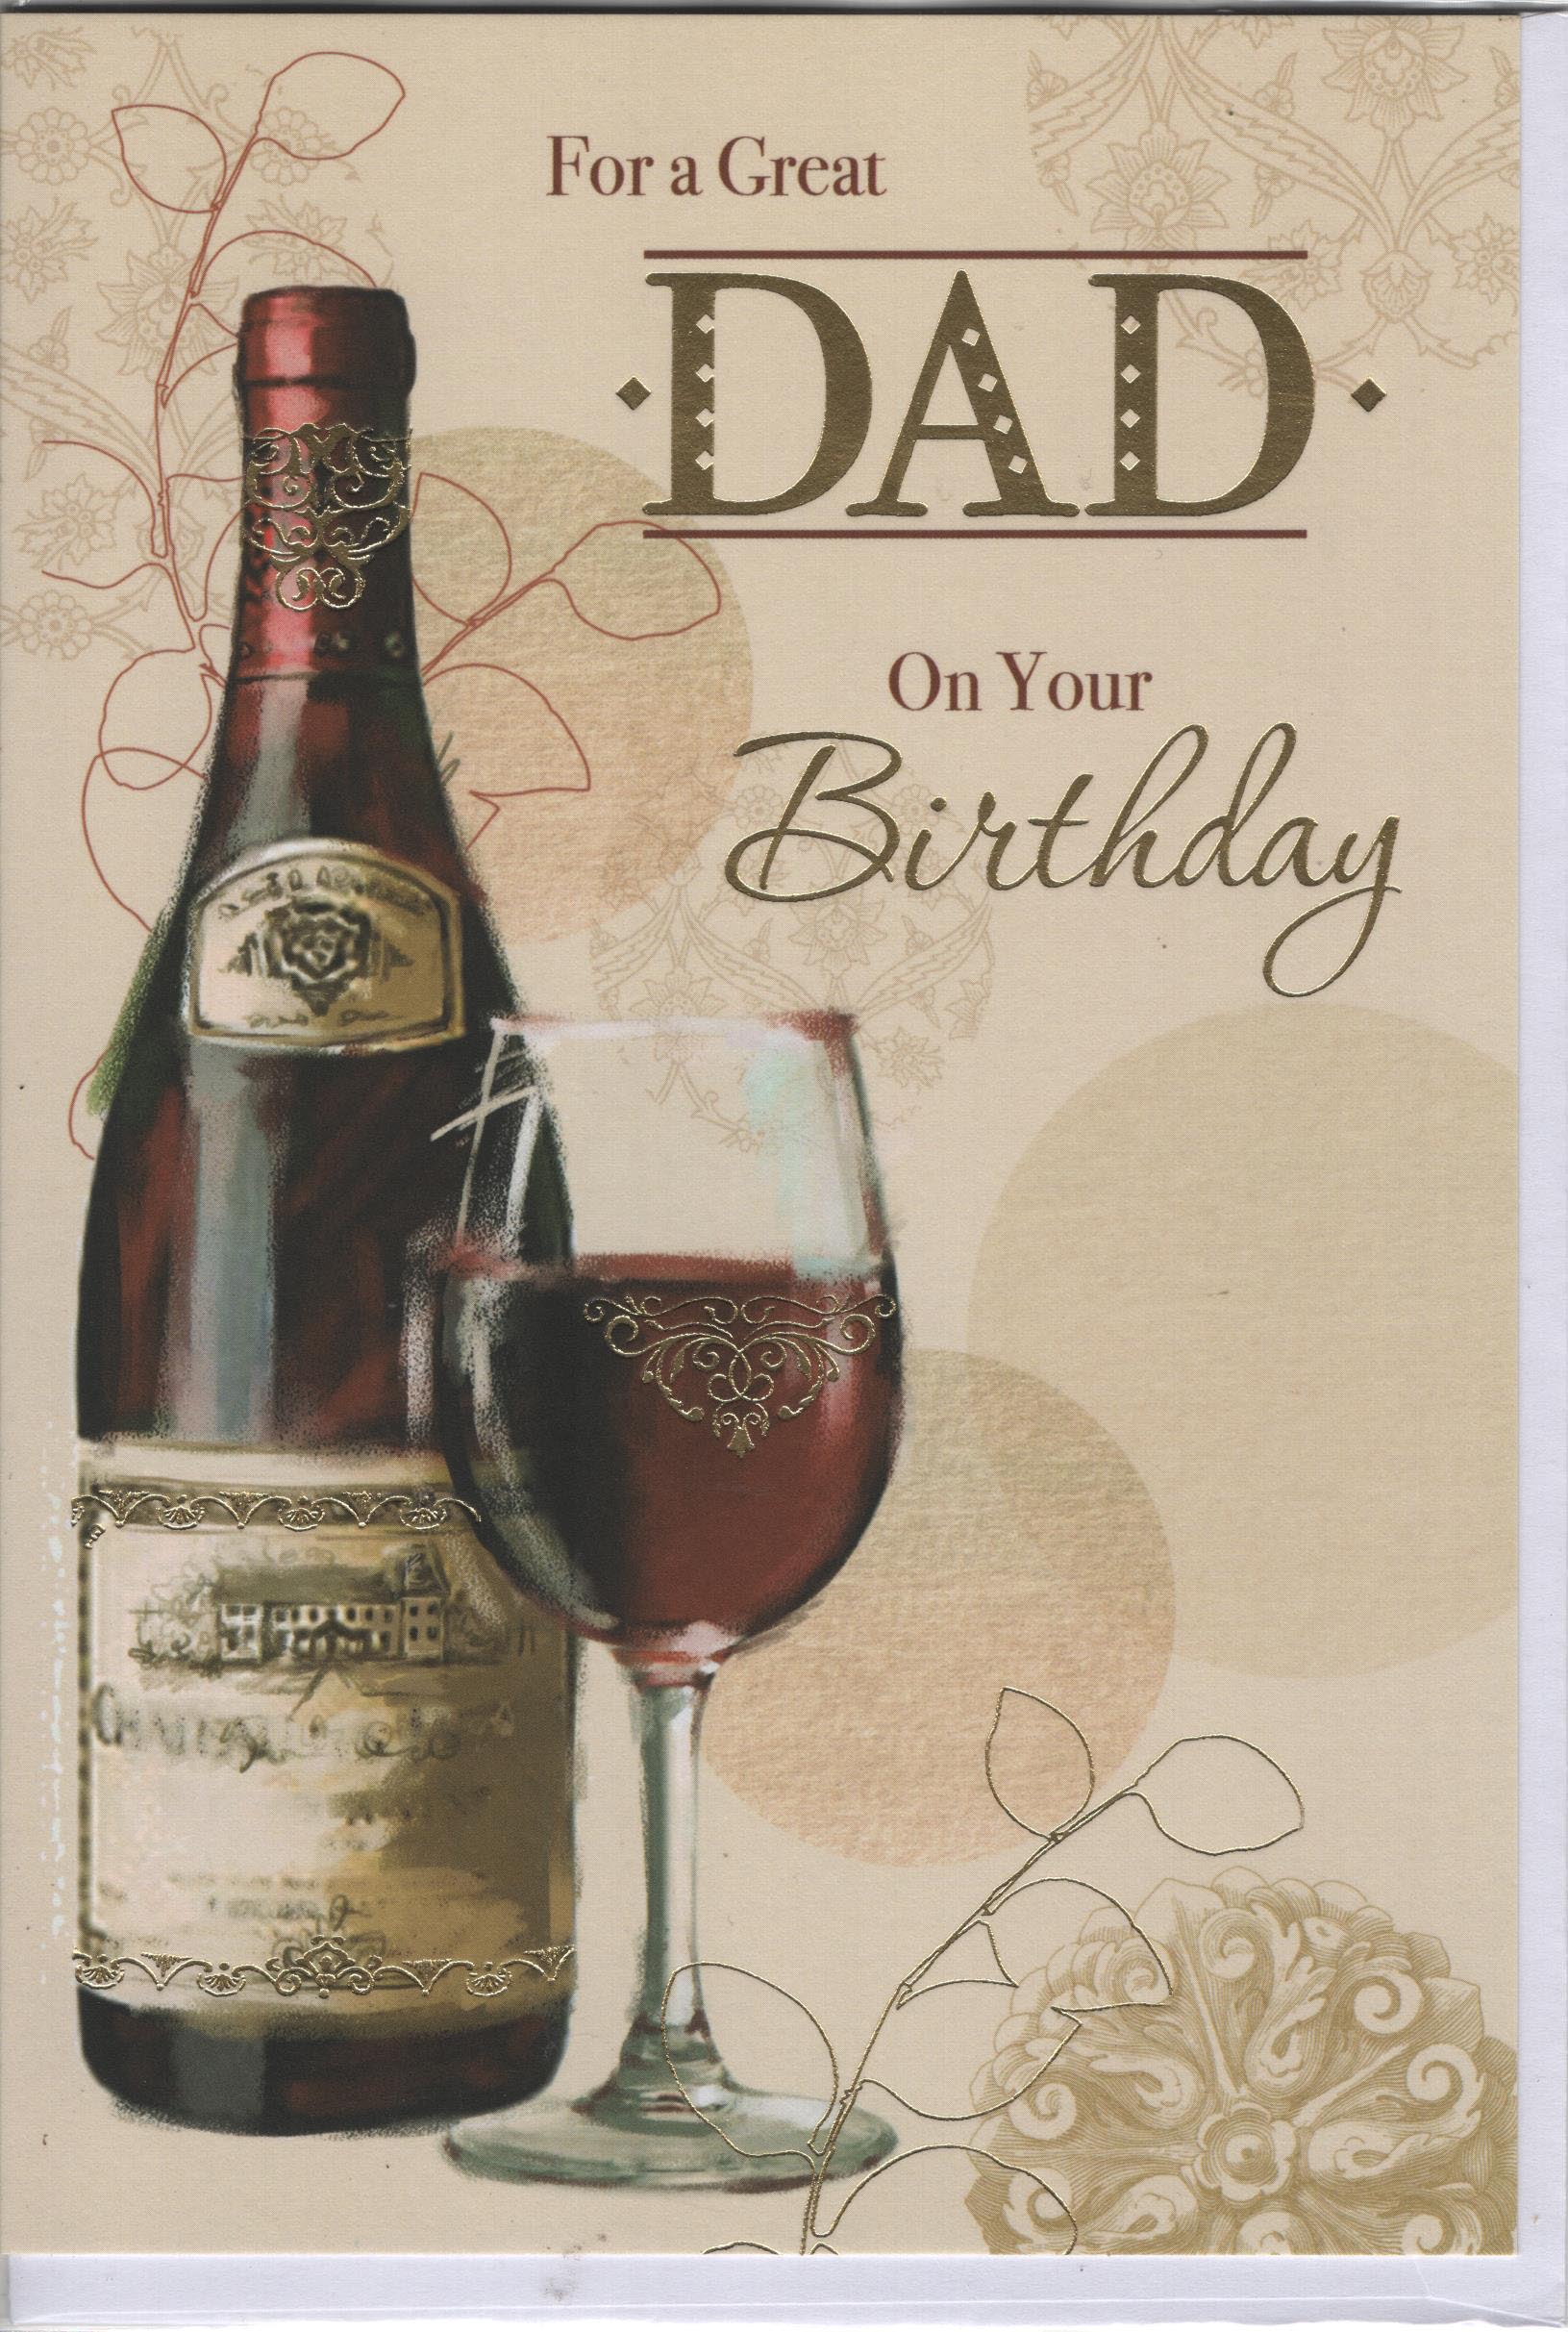 For a Great Dad On Your Birthday